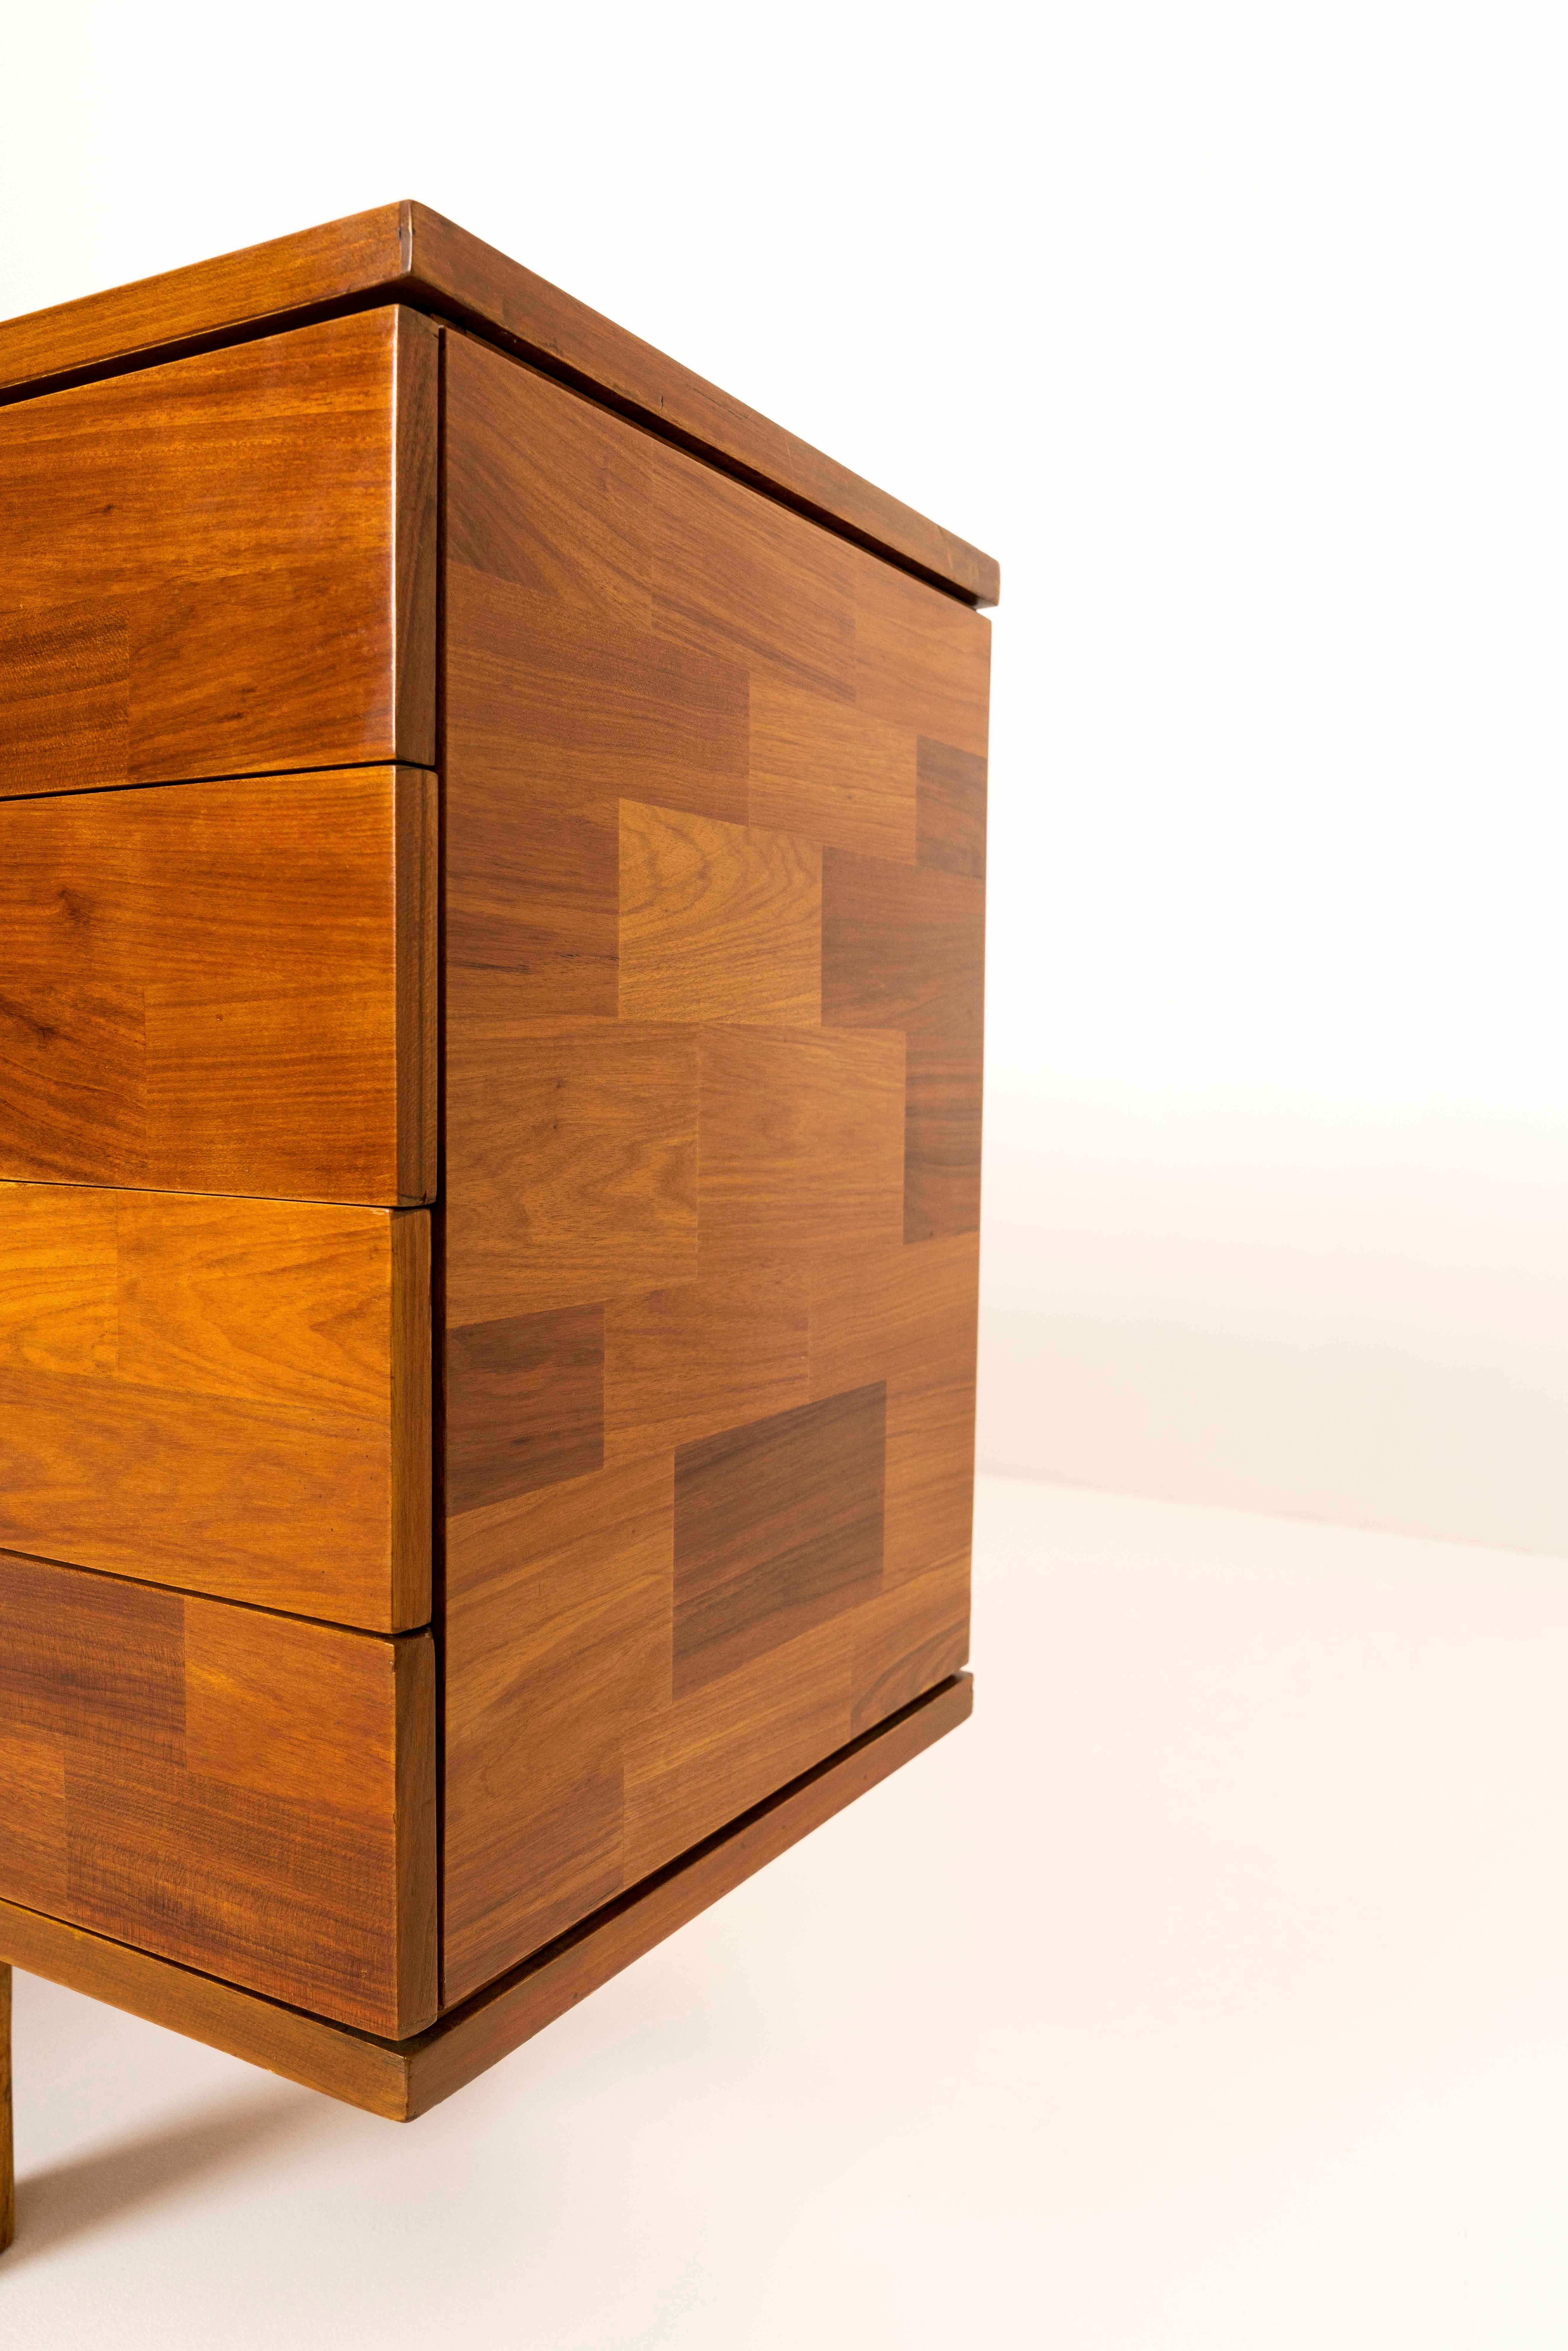 Sideboard by Jorge Zalszupin in Imbuia Wood for L’atelier, Brazil 1960s For Sale 2